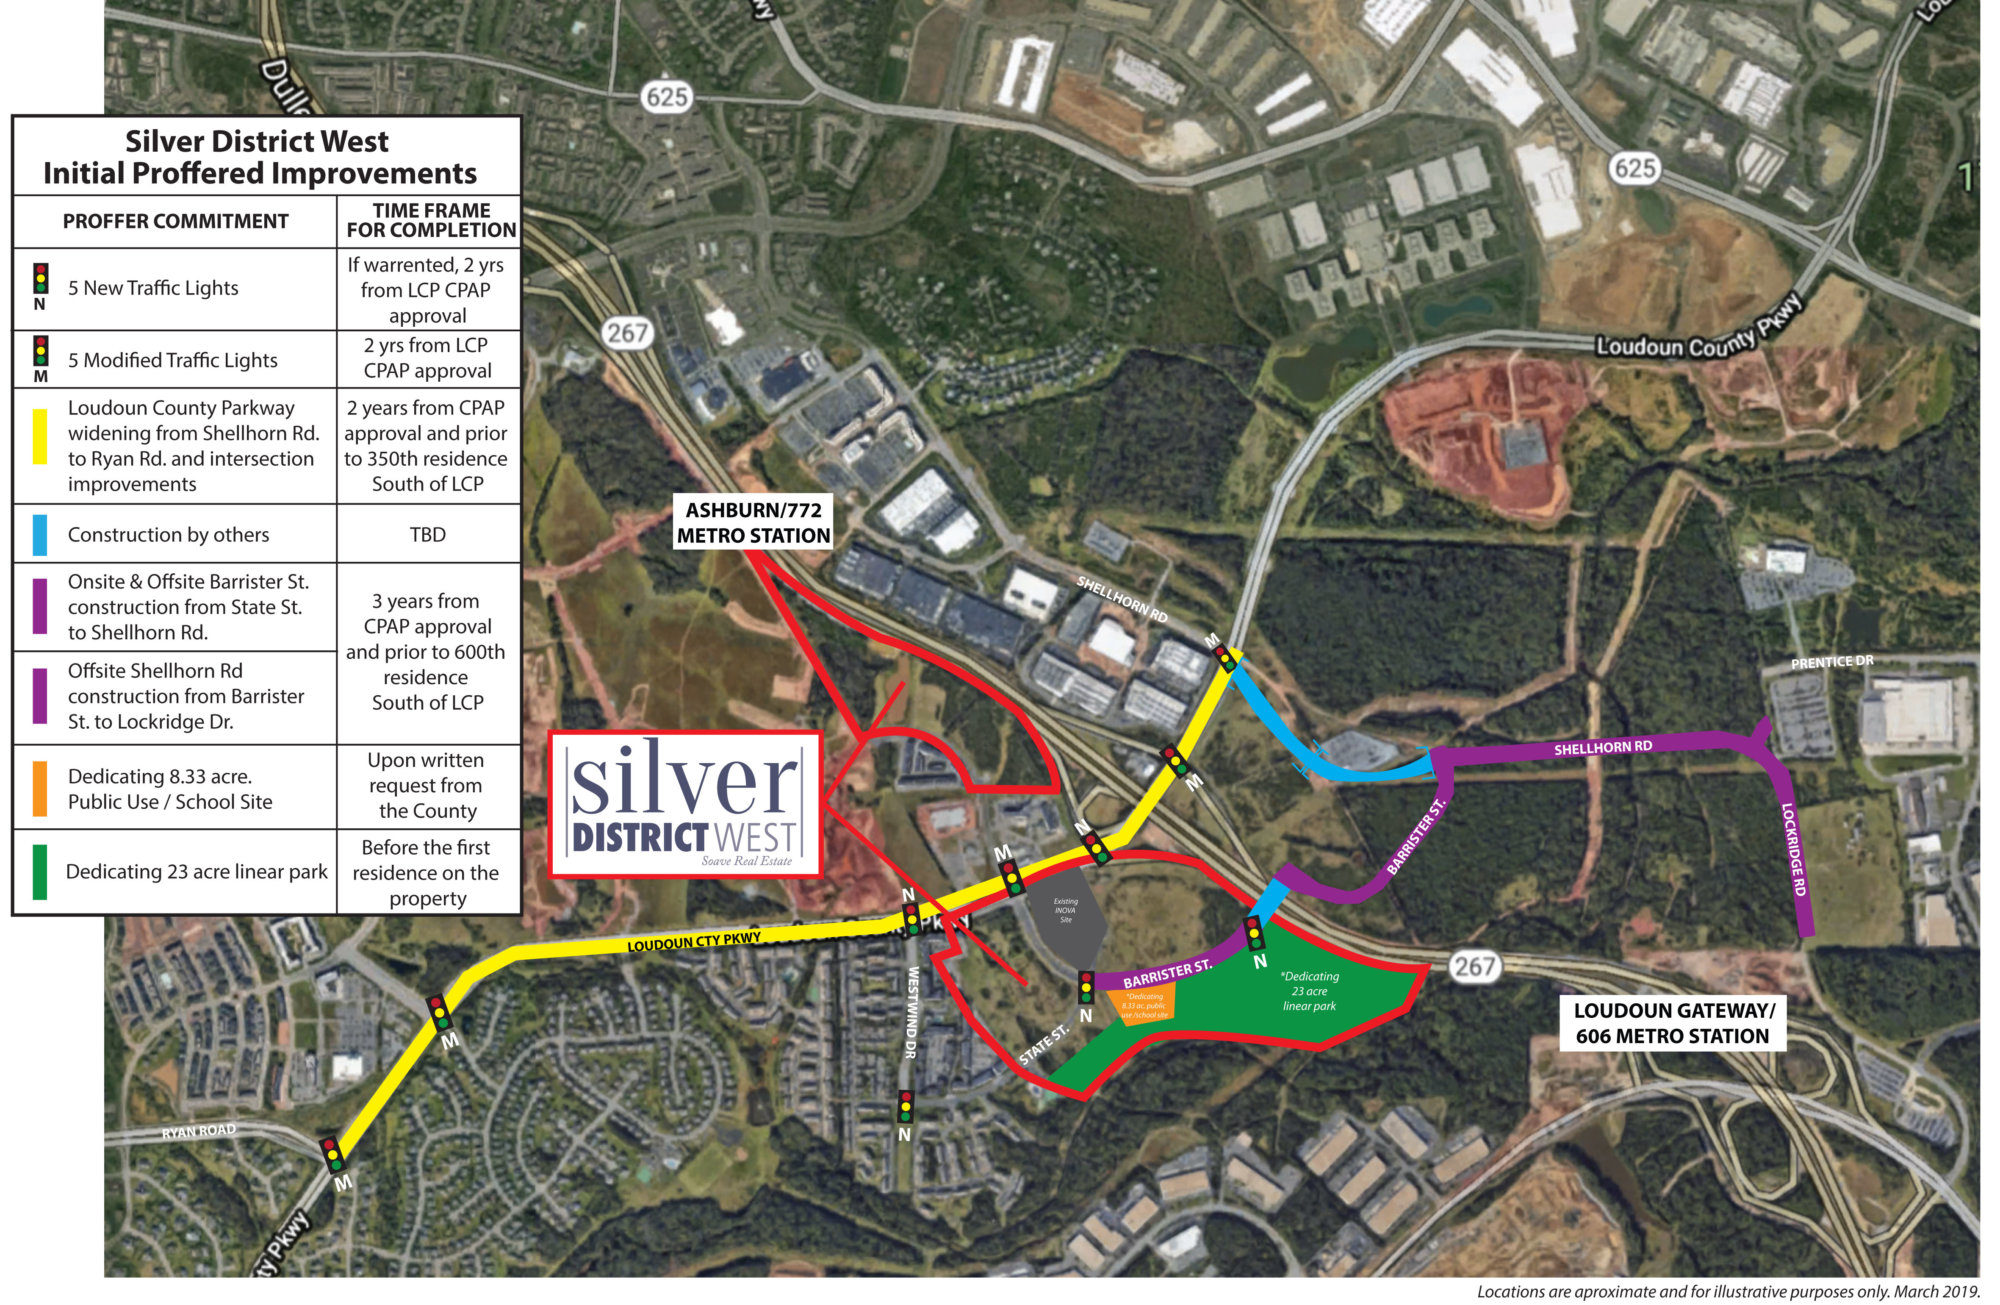 Loudoun Co. approves huge Silver Line mixed-use project | WTOP2000 x 1305